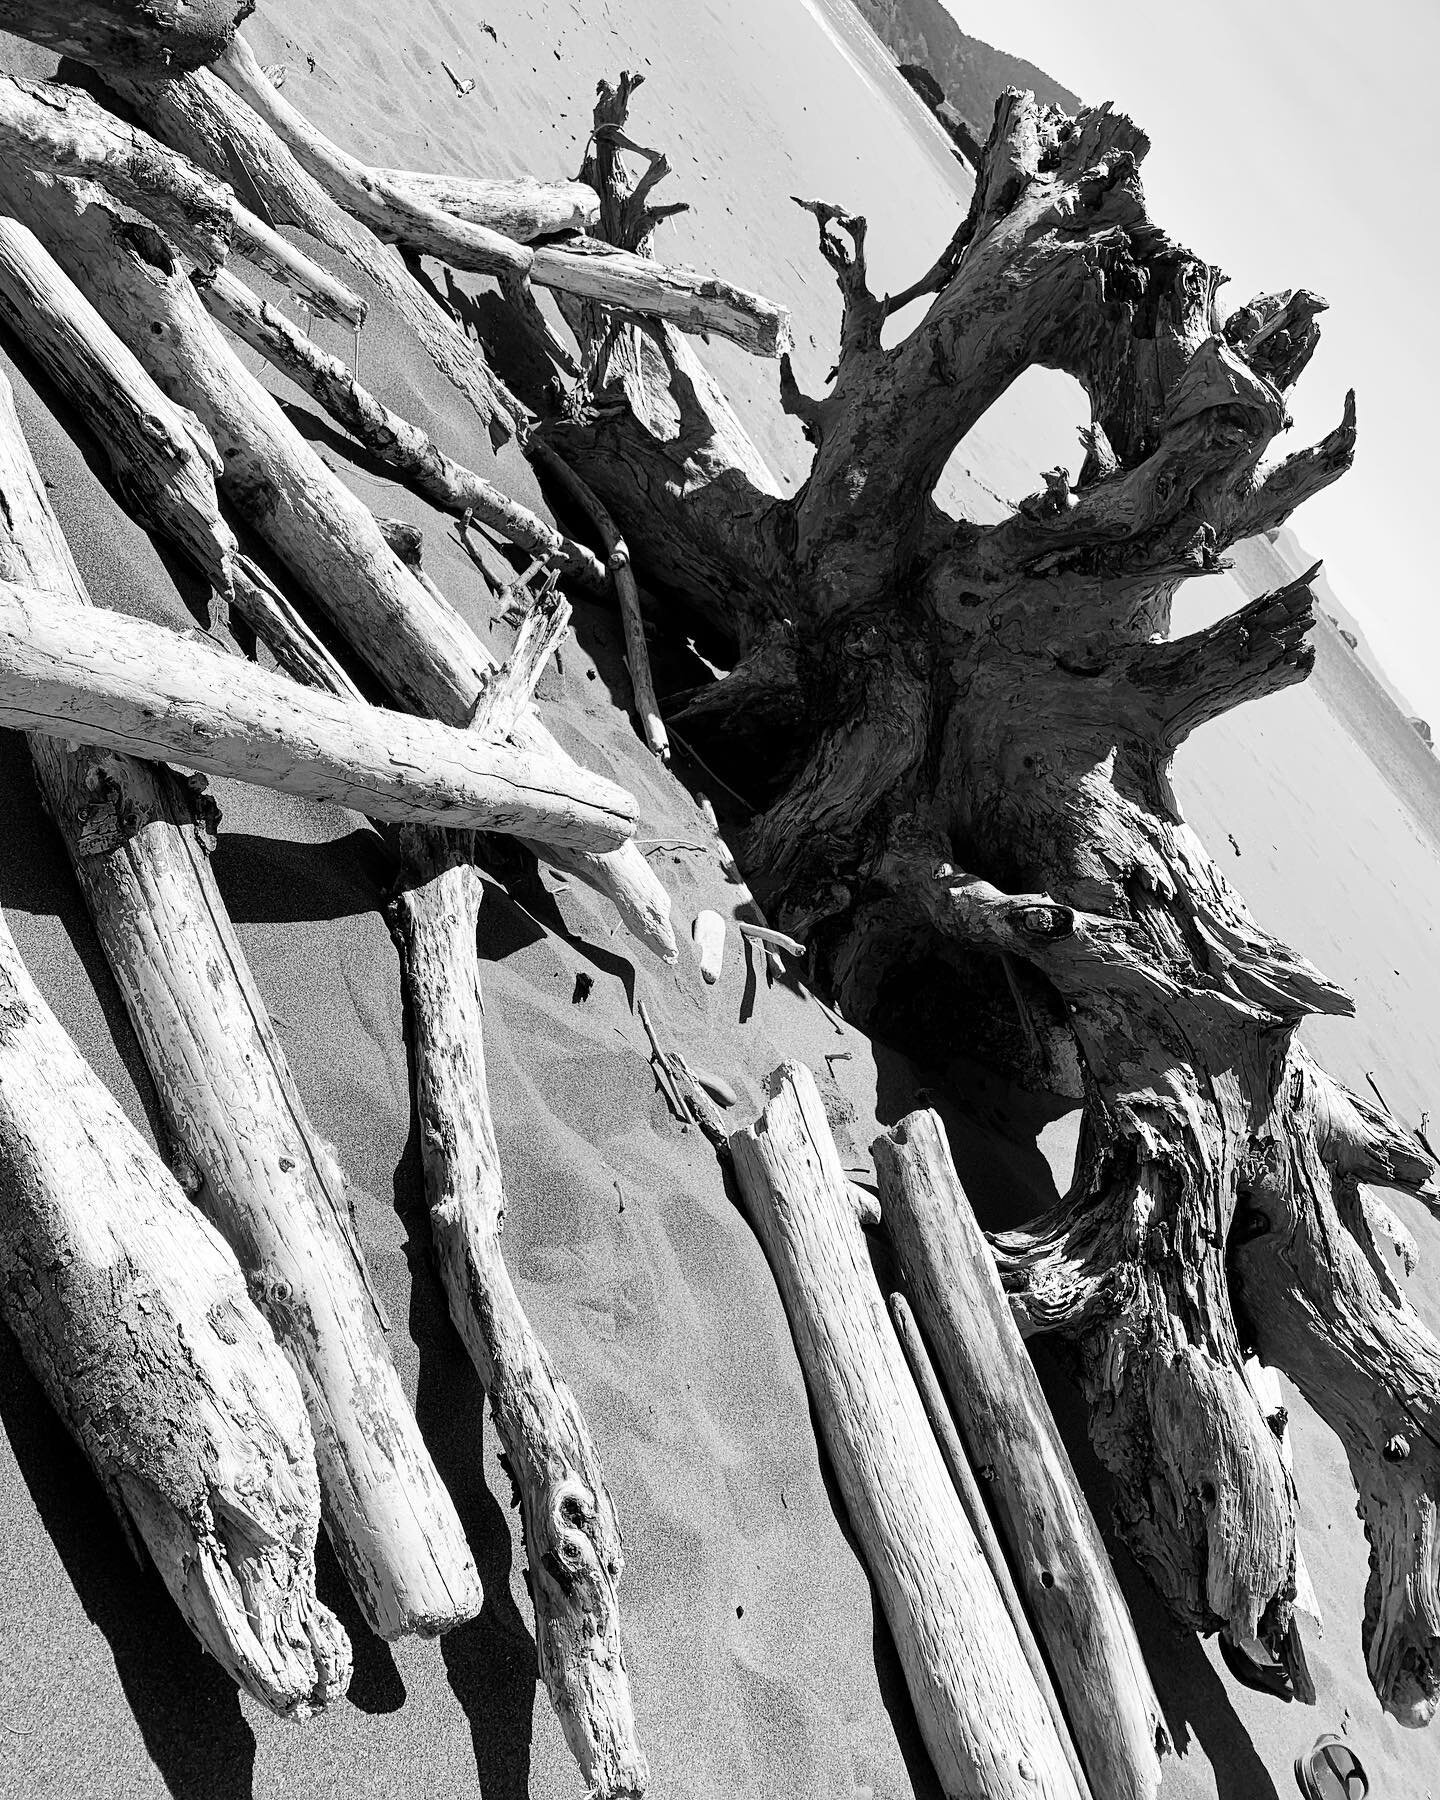 Driftwood
I am but a driftwood
All but forgotten from whence I came
A place where once had a name
A time when all was good

I am but a driftwood
Set myself adrift
Currents they lift
Bearing their latent gifts
I move as they shift
I'd protest if only 